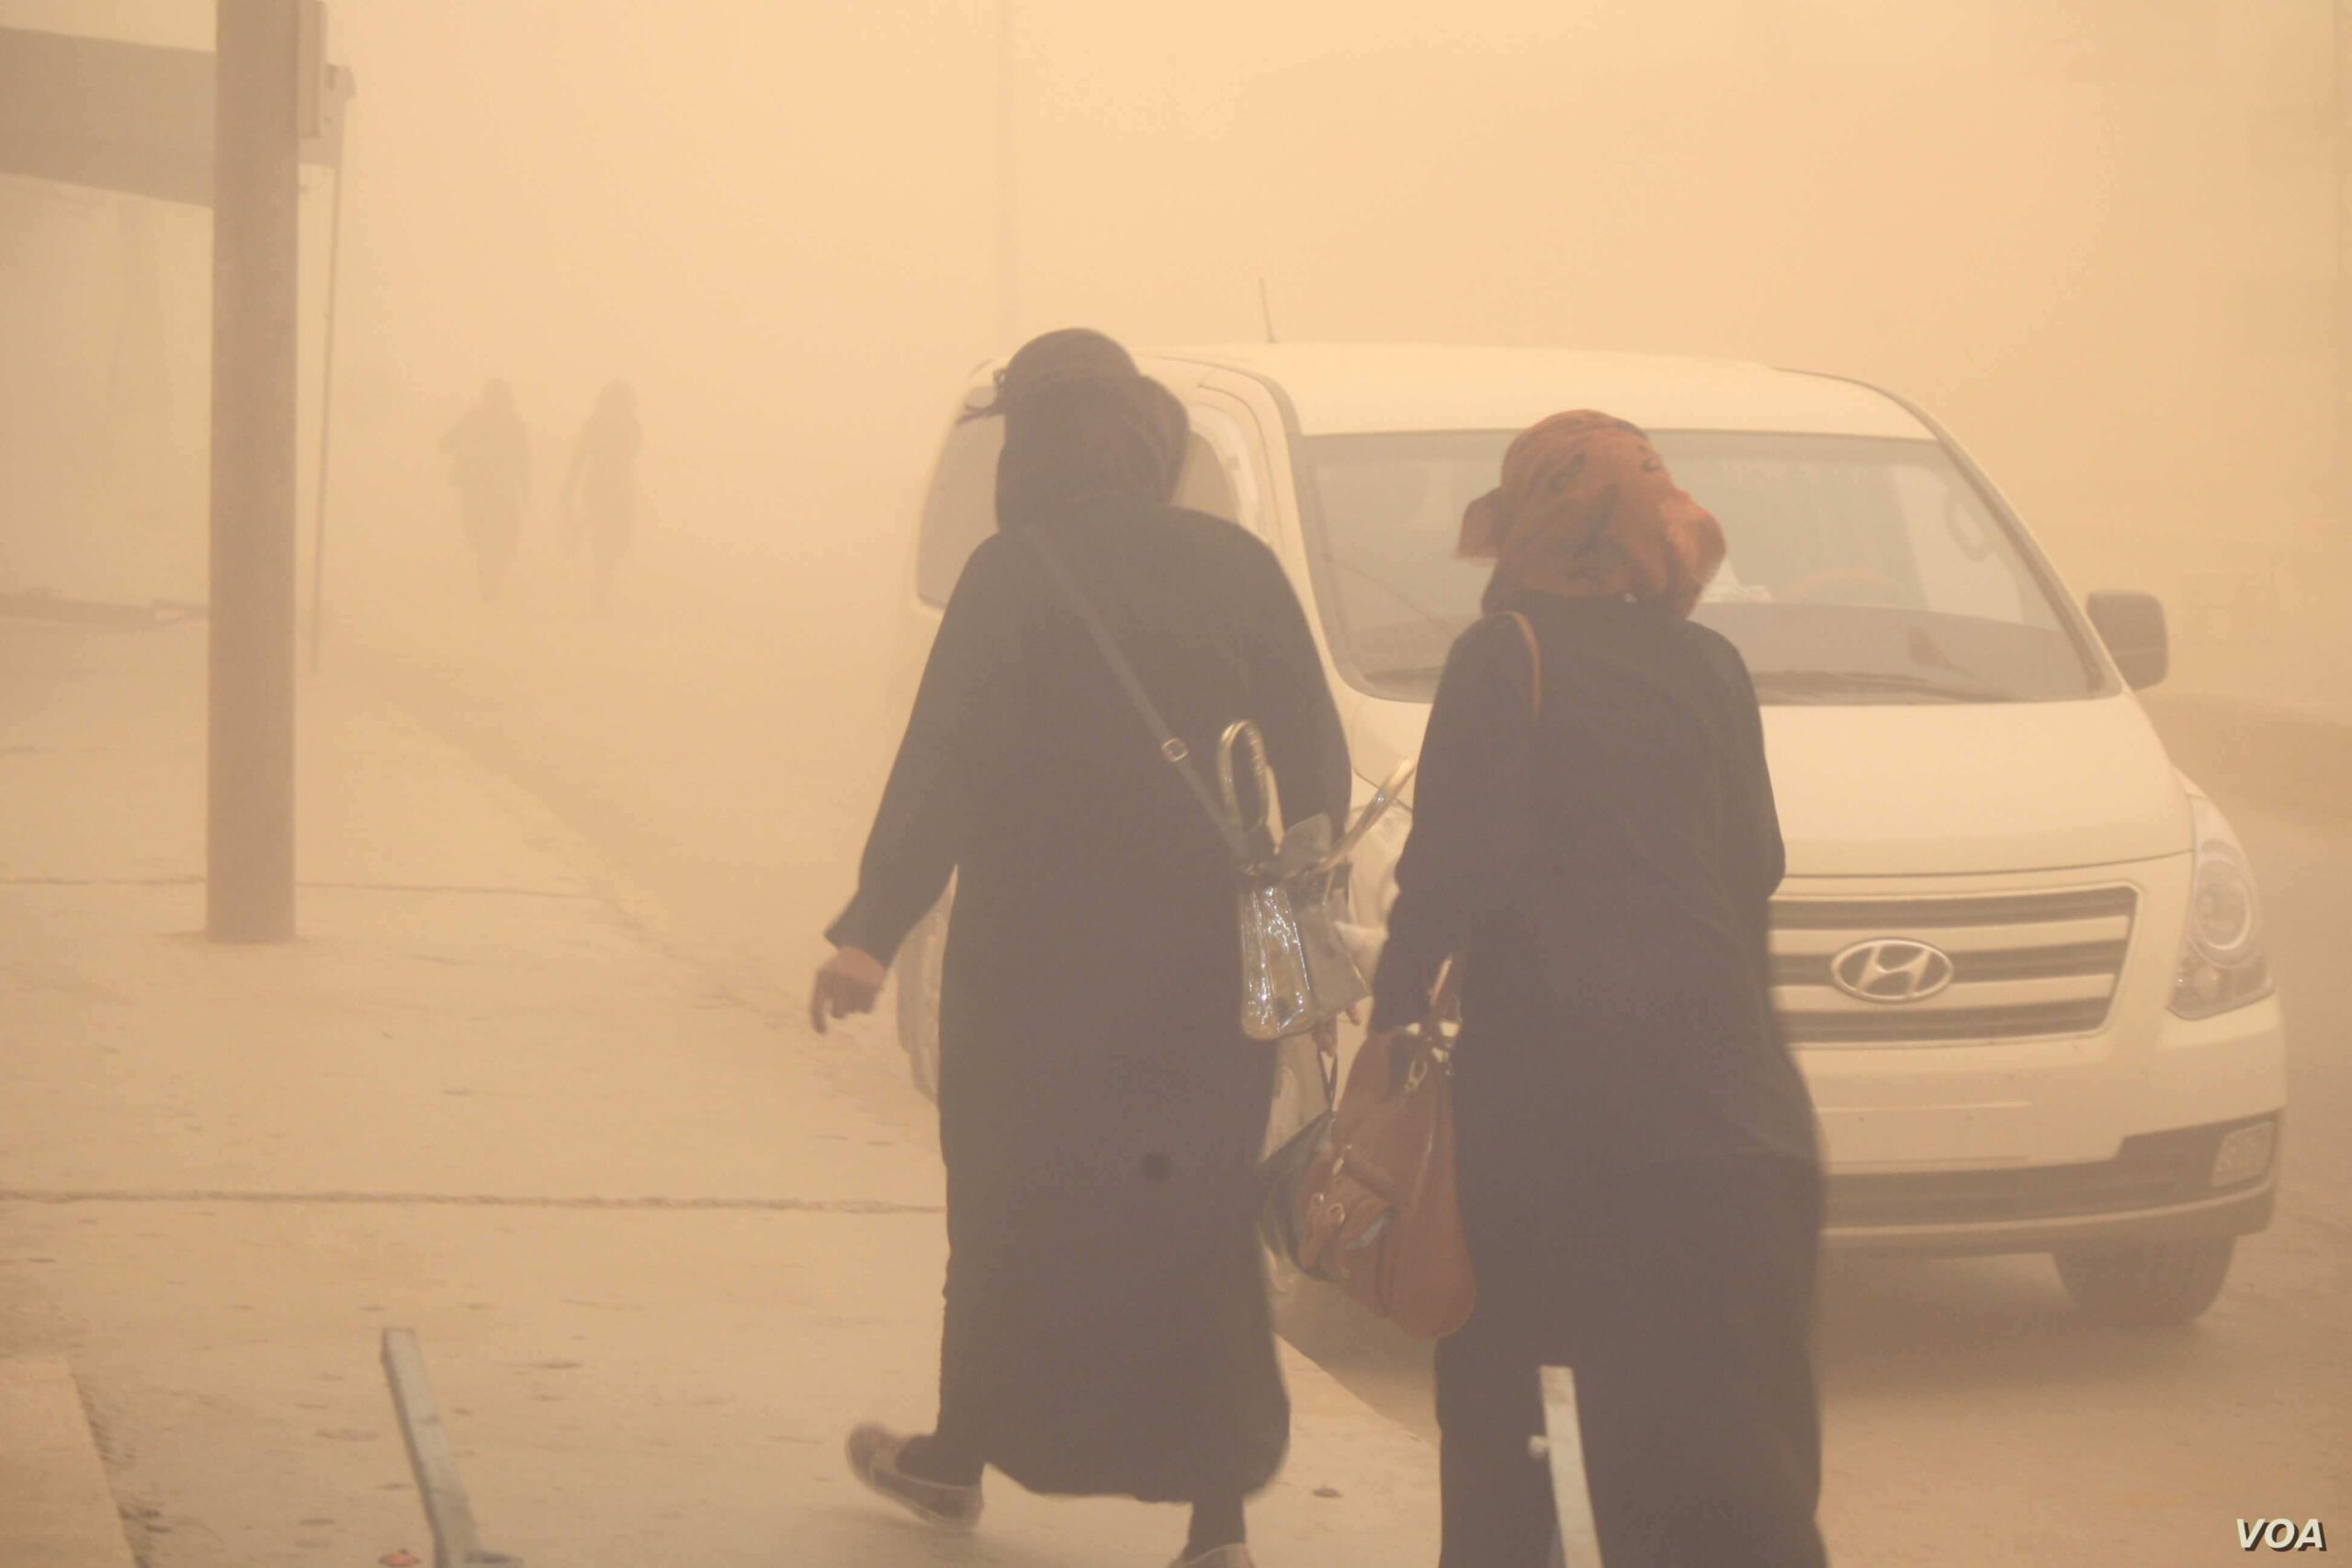 Dust Pollution Linked to Infant Mortality, Impaired Growth in Sub-Saharan Africa